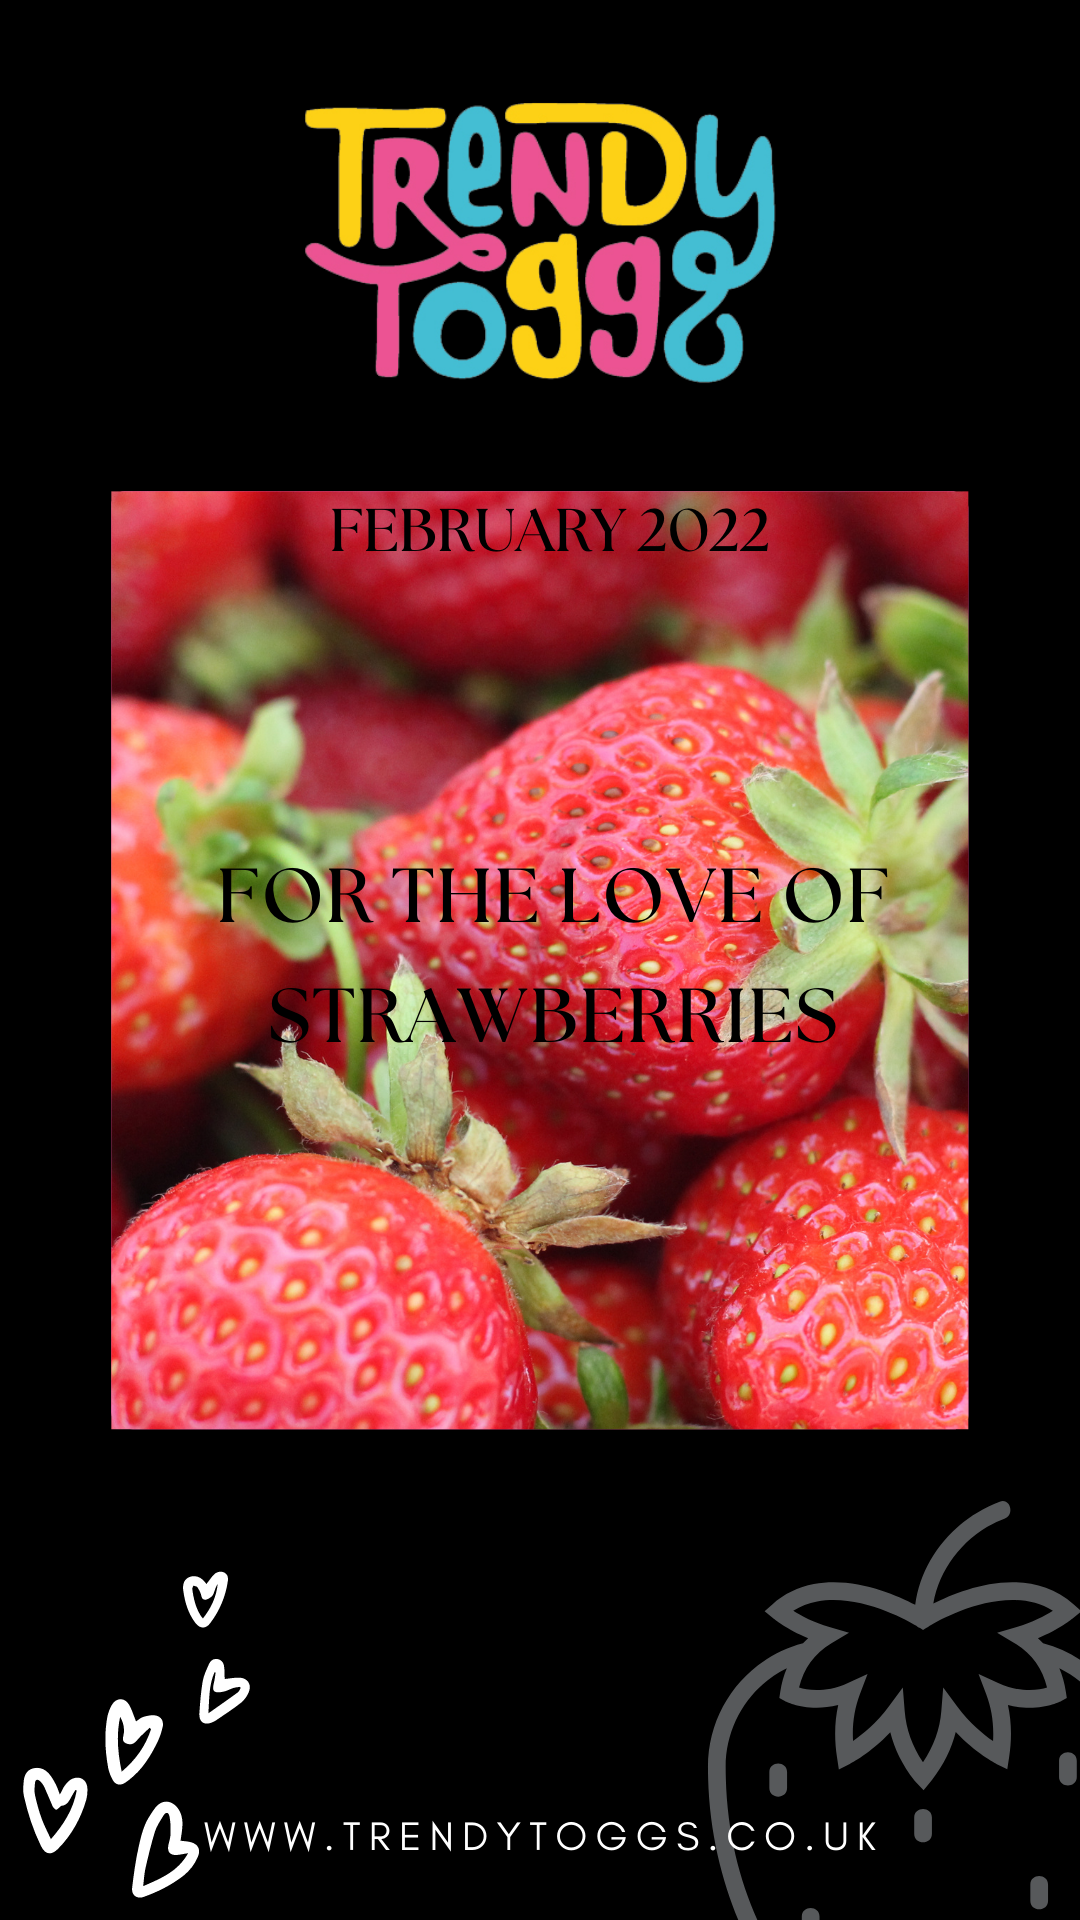 For the Love of Strawberries